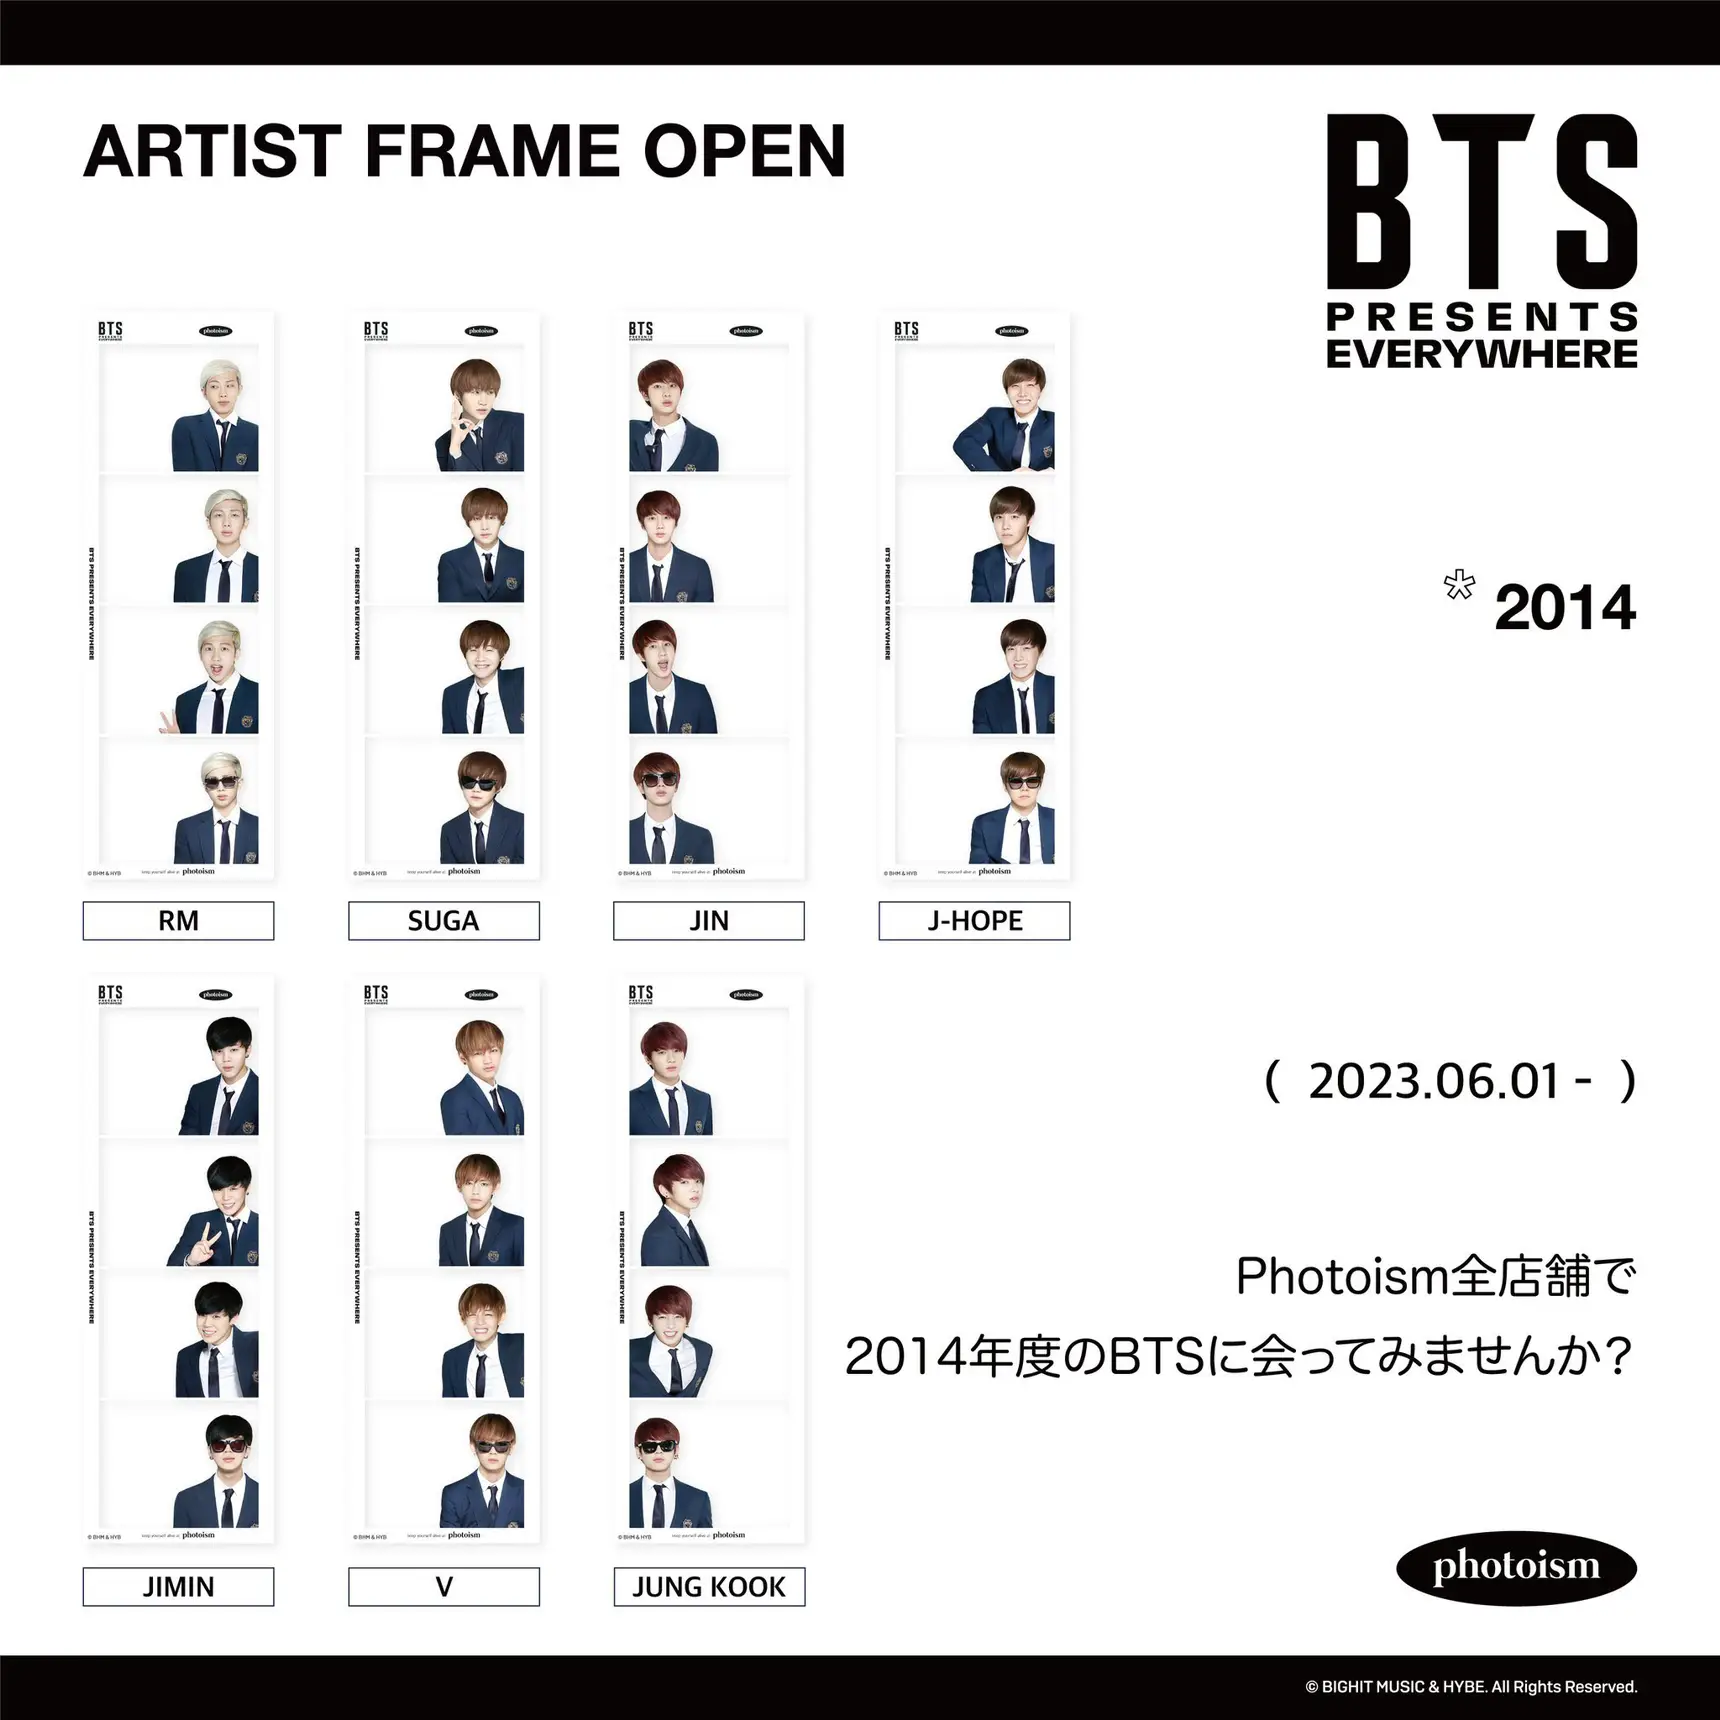 HYBE MERCH] ARTIST-MADE COLLECTION BY #BTS Merch. Style Photo - j